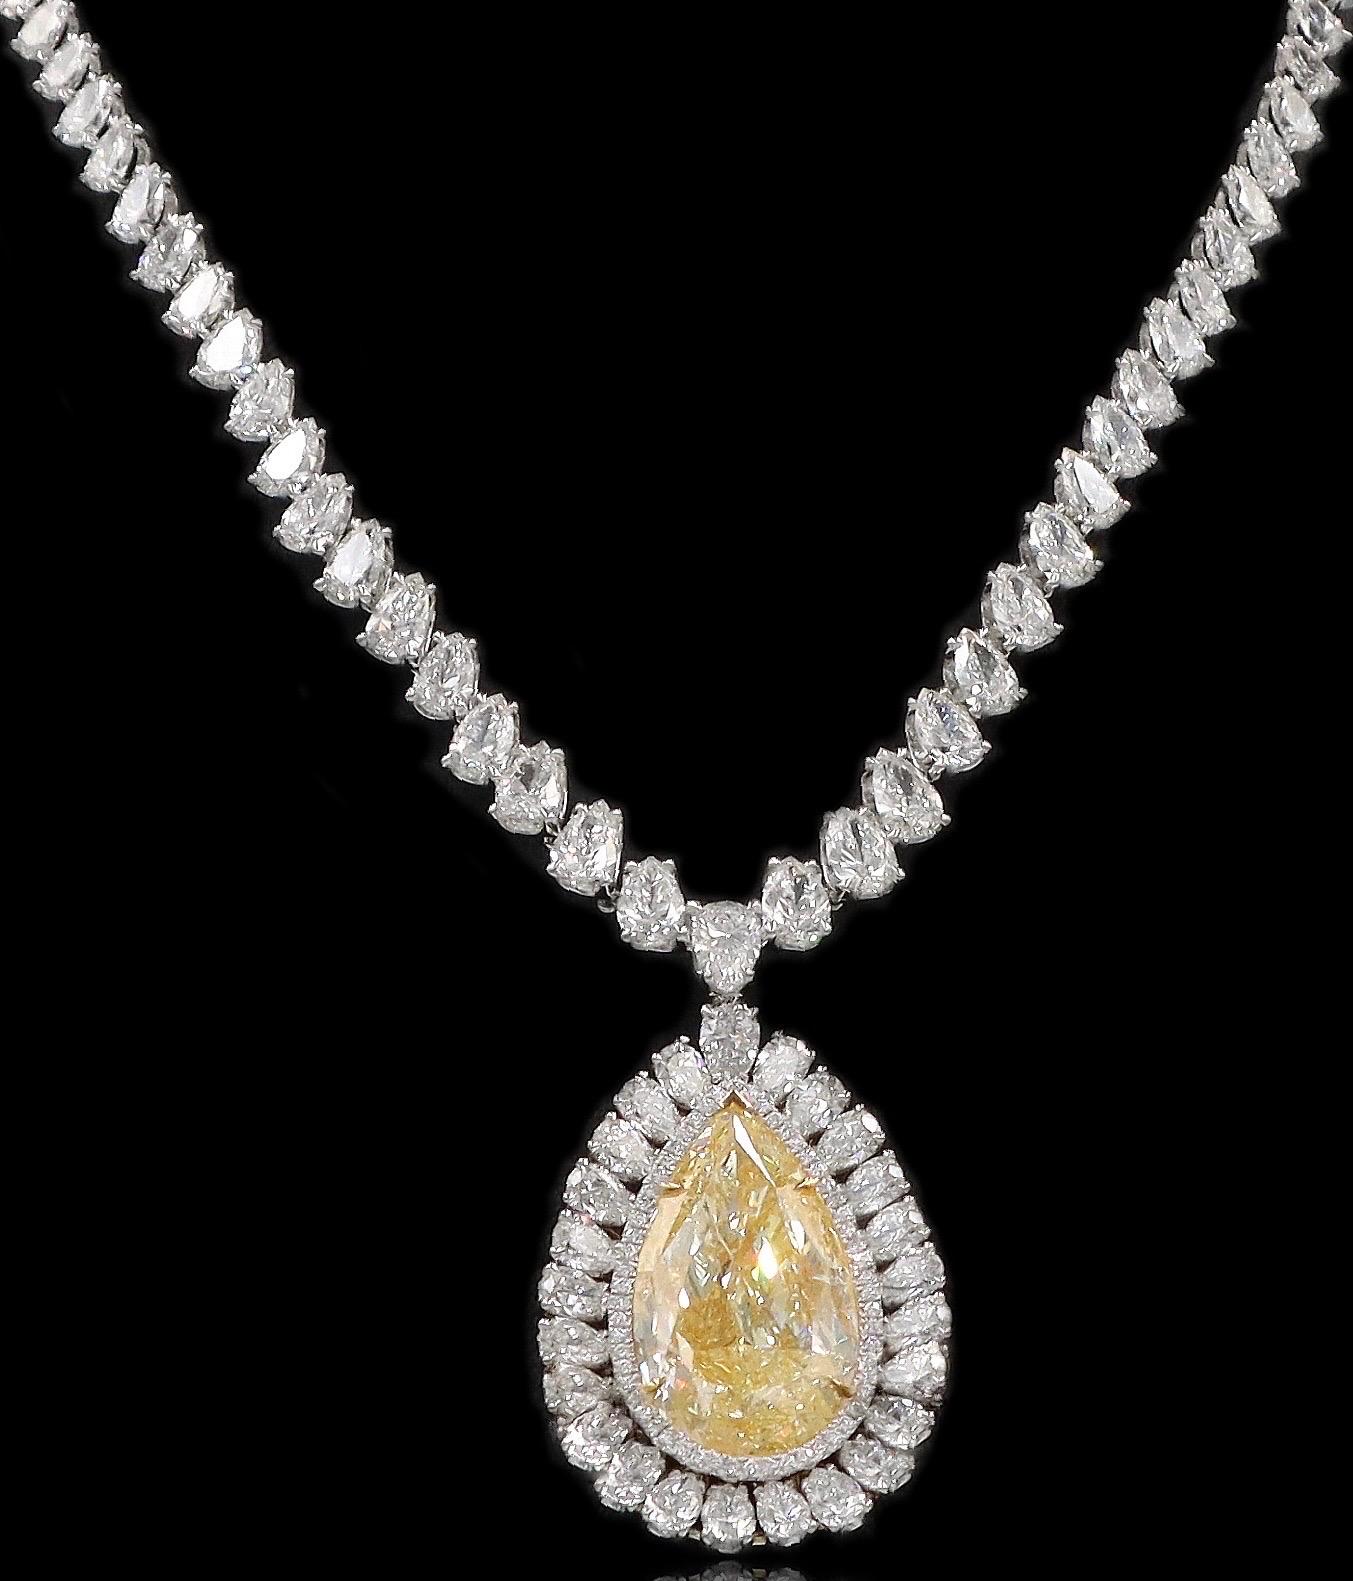 From Emilio Jewelry located on New York's iconic Fifth Avenue,
featuring a hard to come by Gia certified 25.00 carat yellow diamond pear shape drop diamond. The necklace is set with an array of pear and round shape diamonds adding an additional